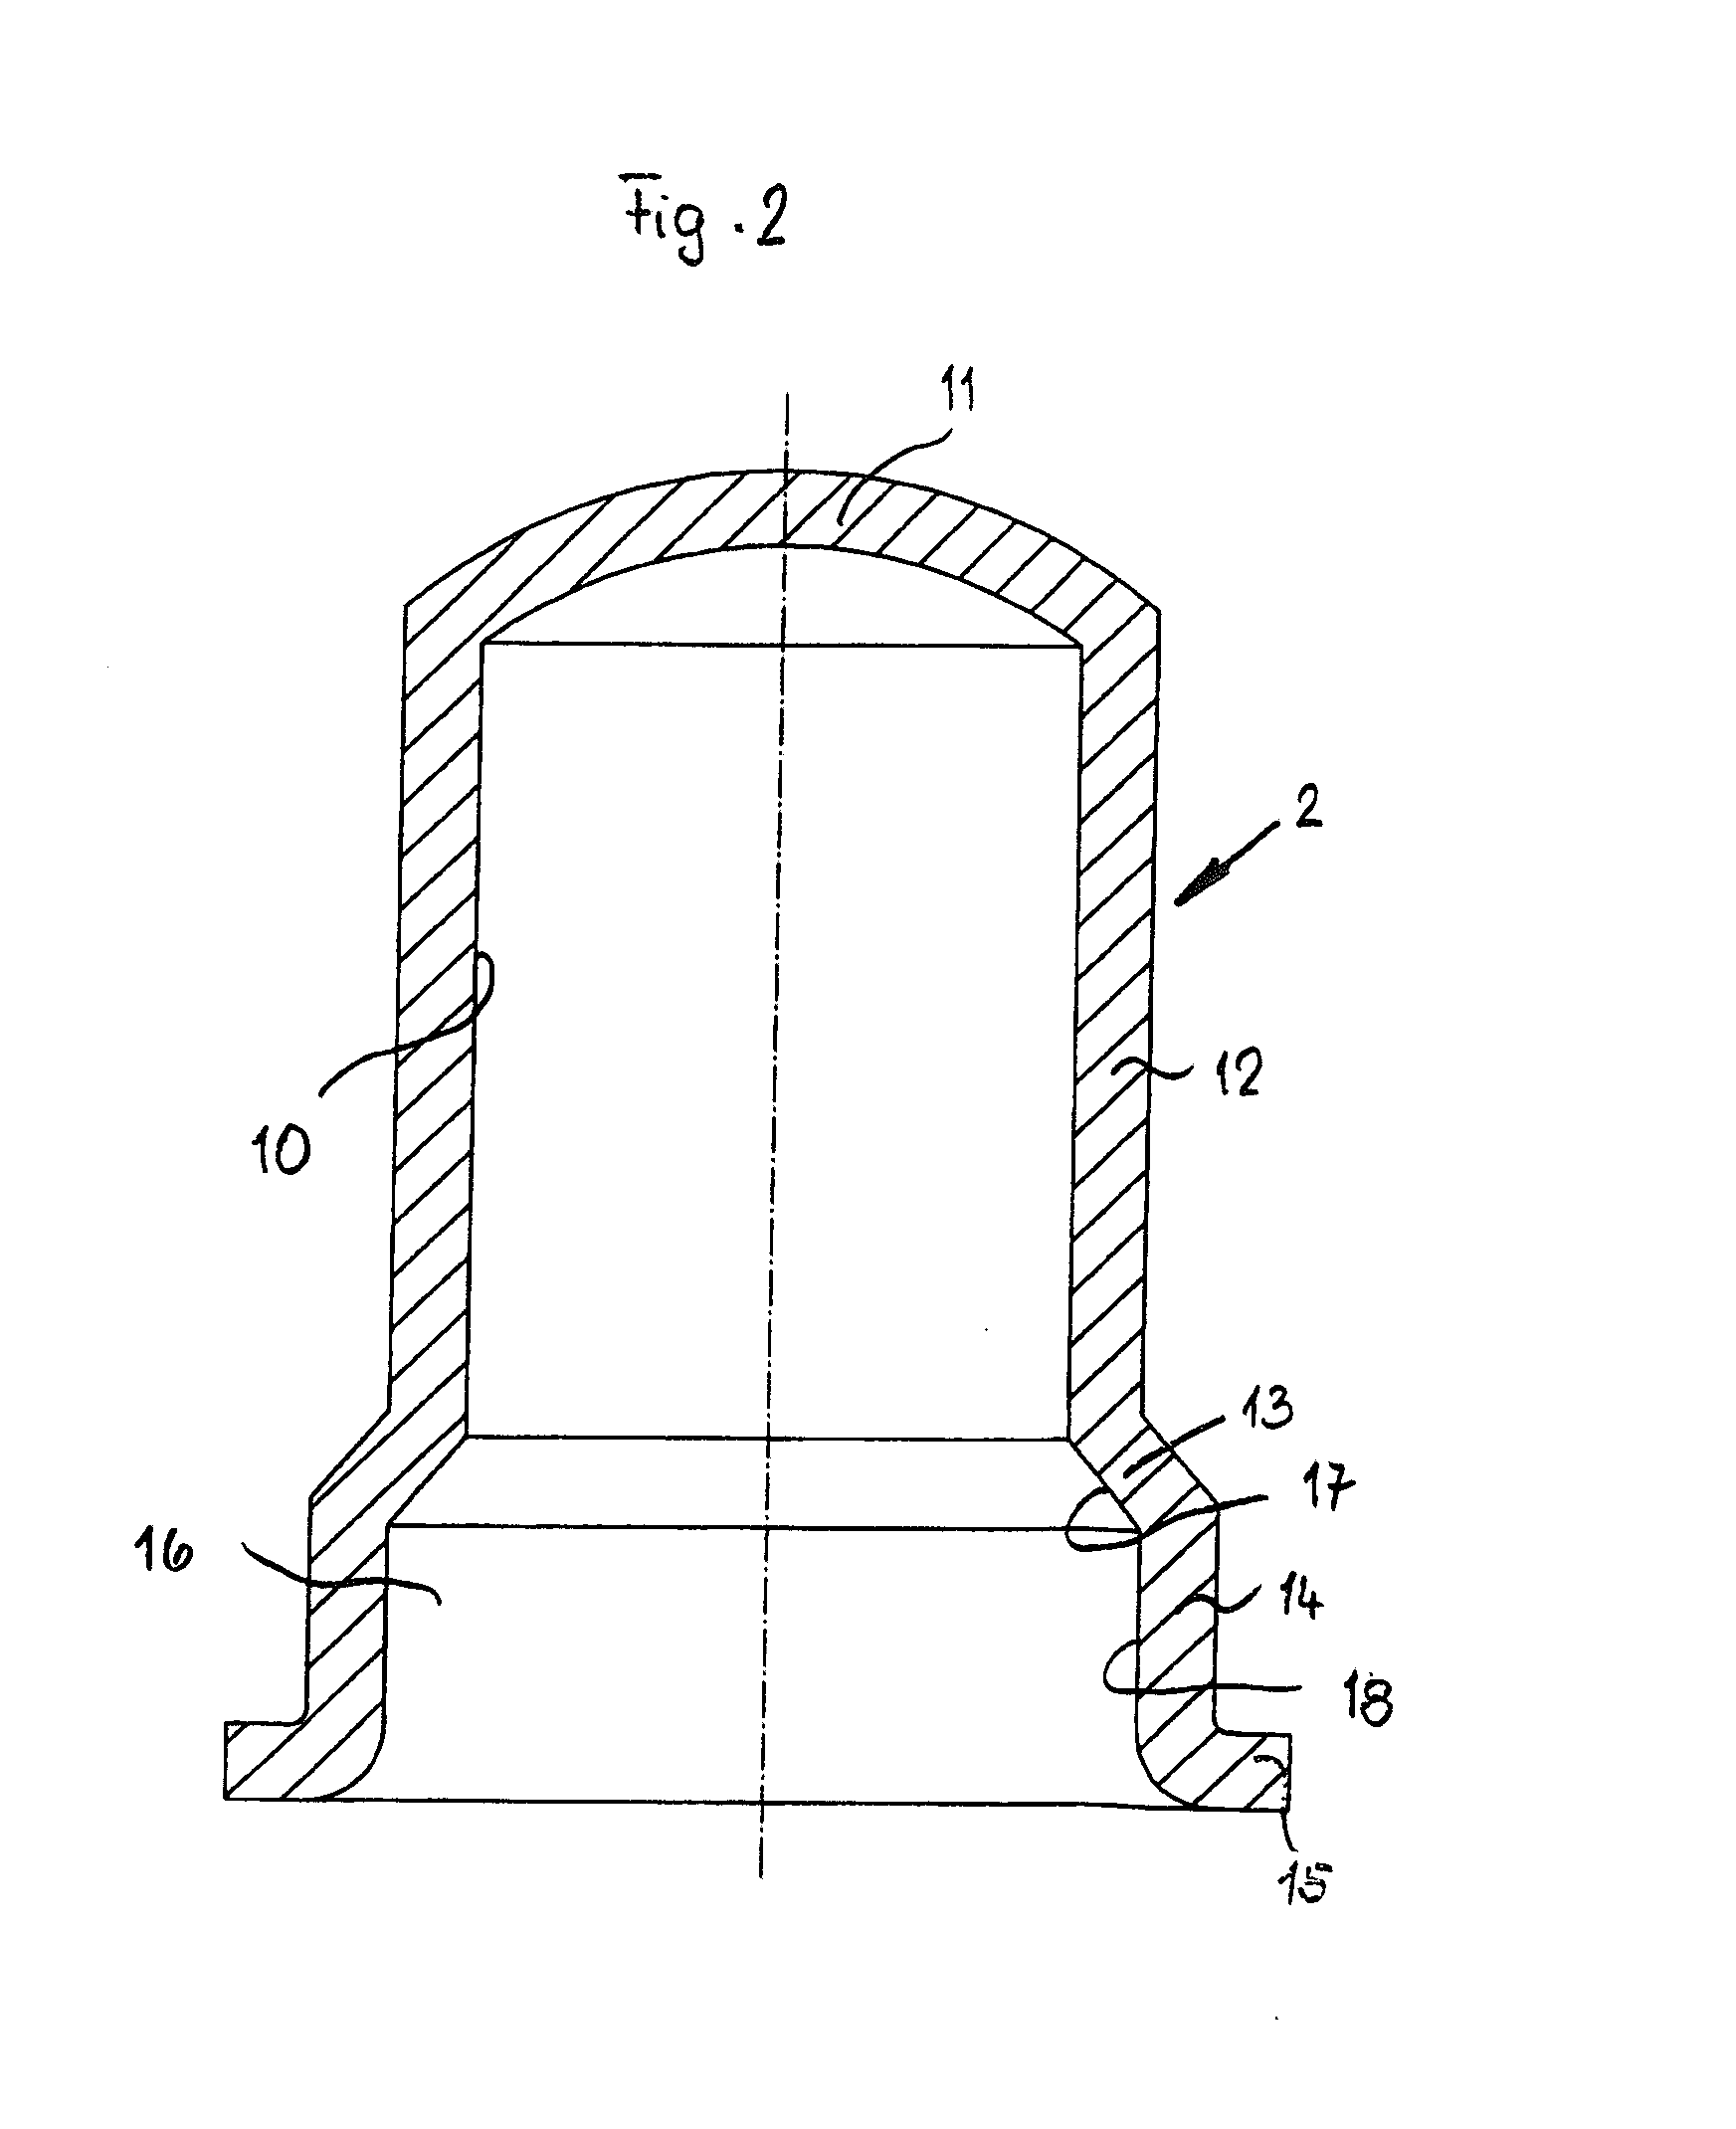 Method for producing a non-detachable connection between at least two workpieces, and connection produced according to this method